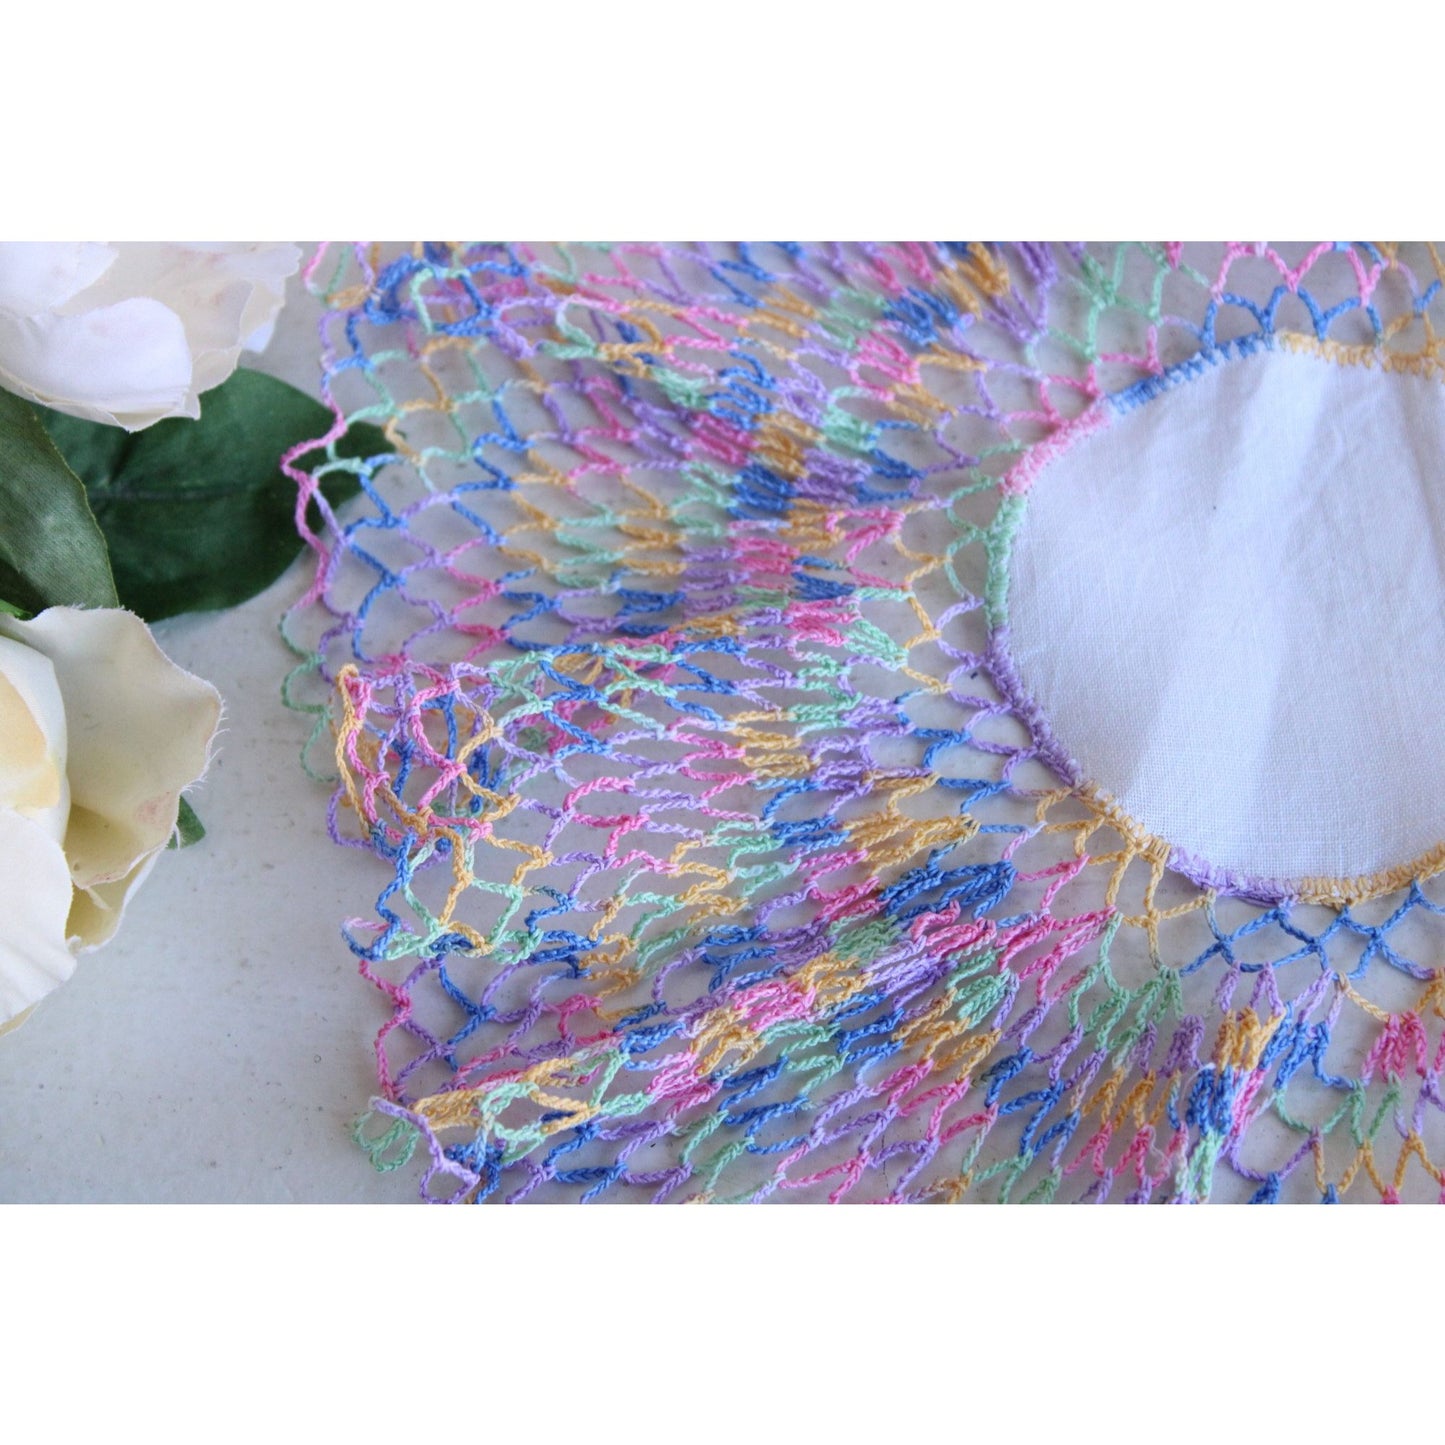 Vintage 1960s White Linen Doily with Rainbow Crochet Lace